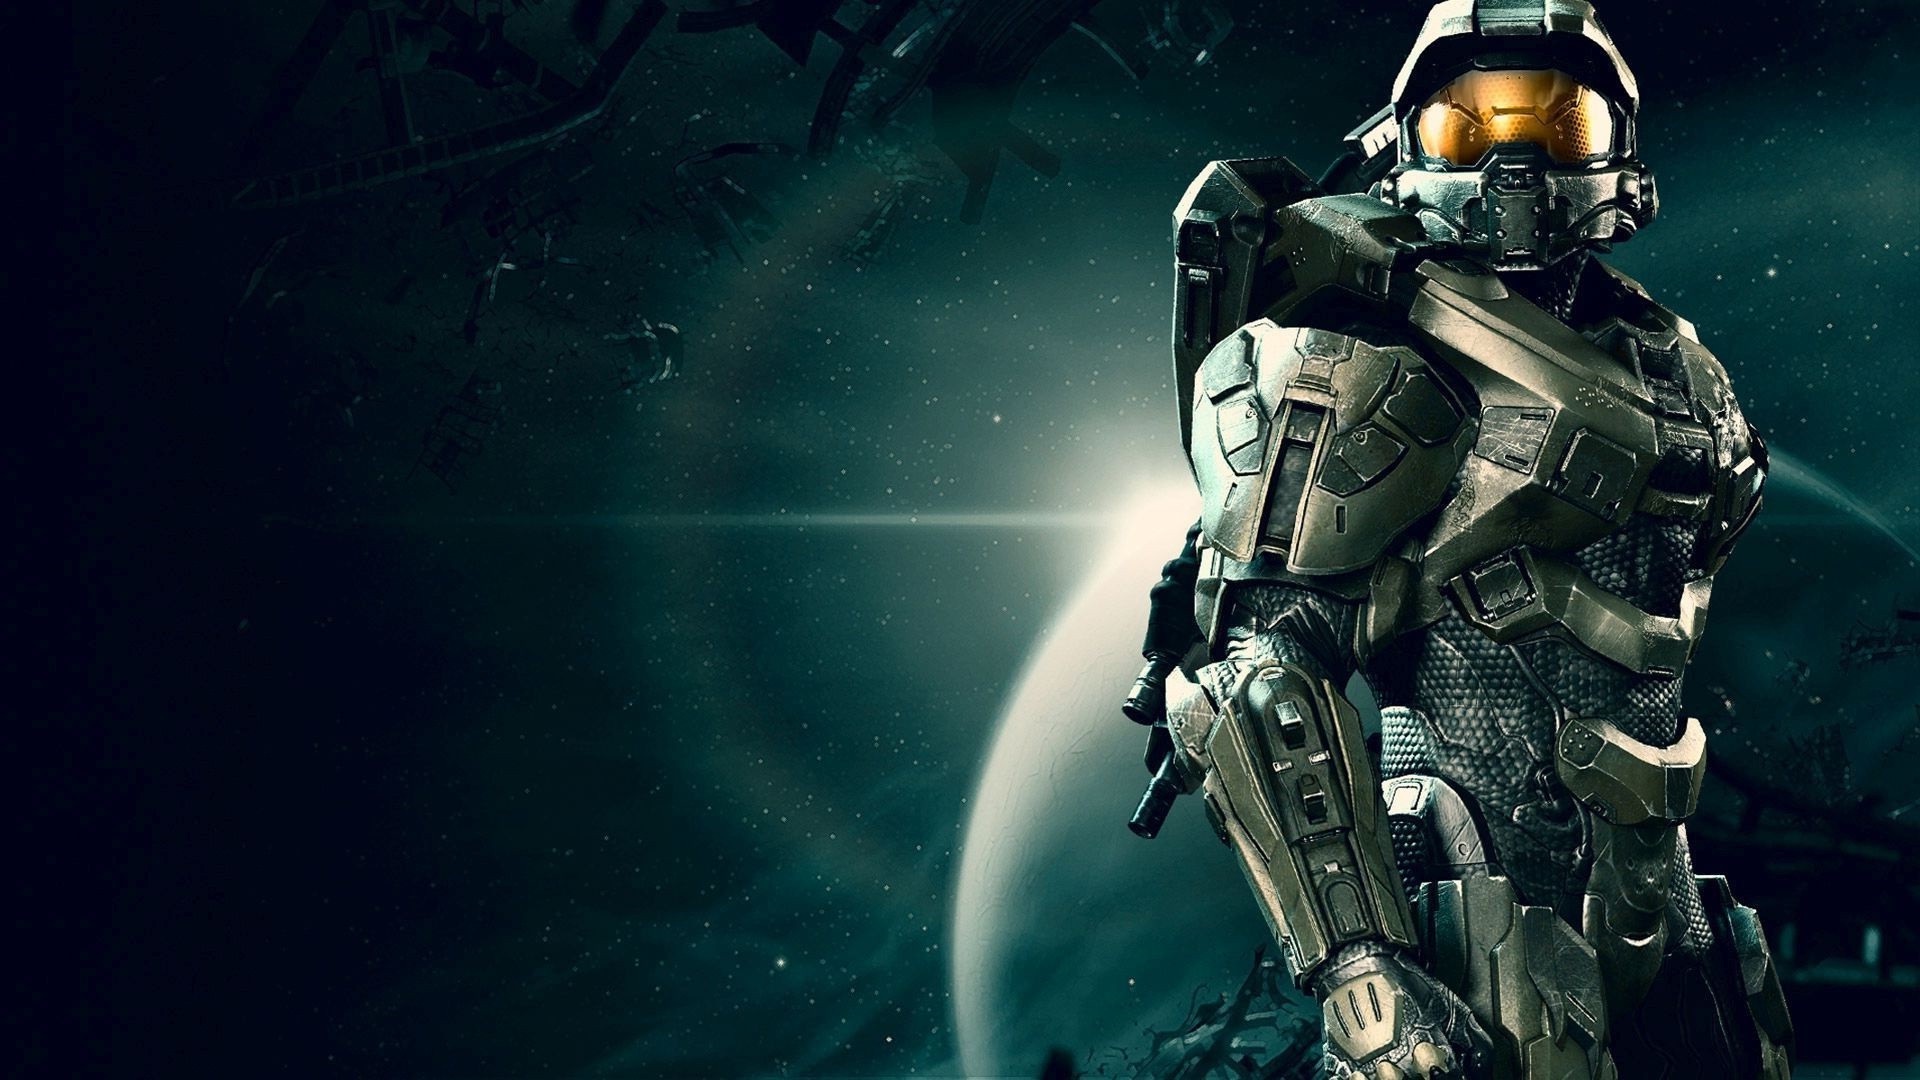 video Games, Halo, Halo 4, Master Chief, UNSC Infinity, 343 Industries, Spartans, Xbox One Wallpaper